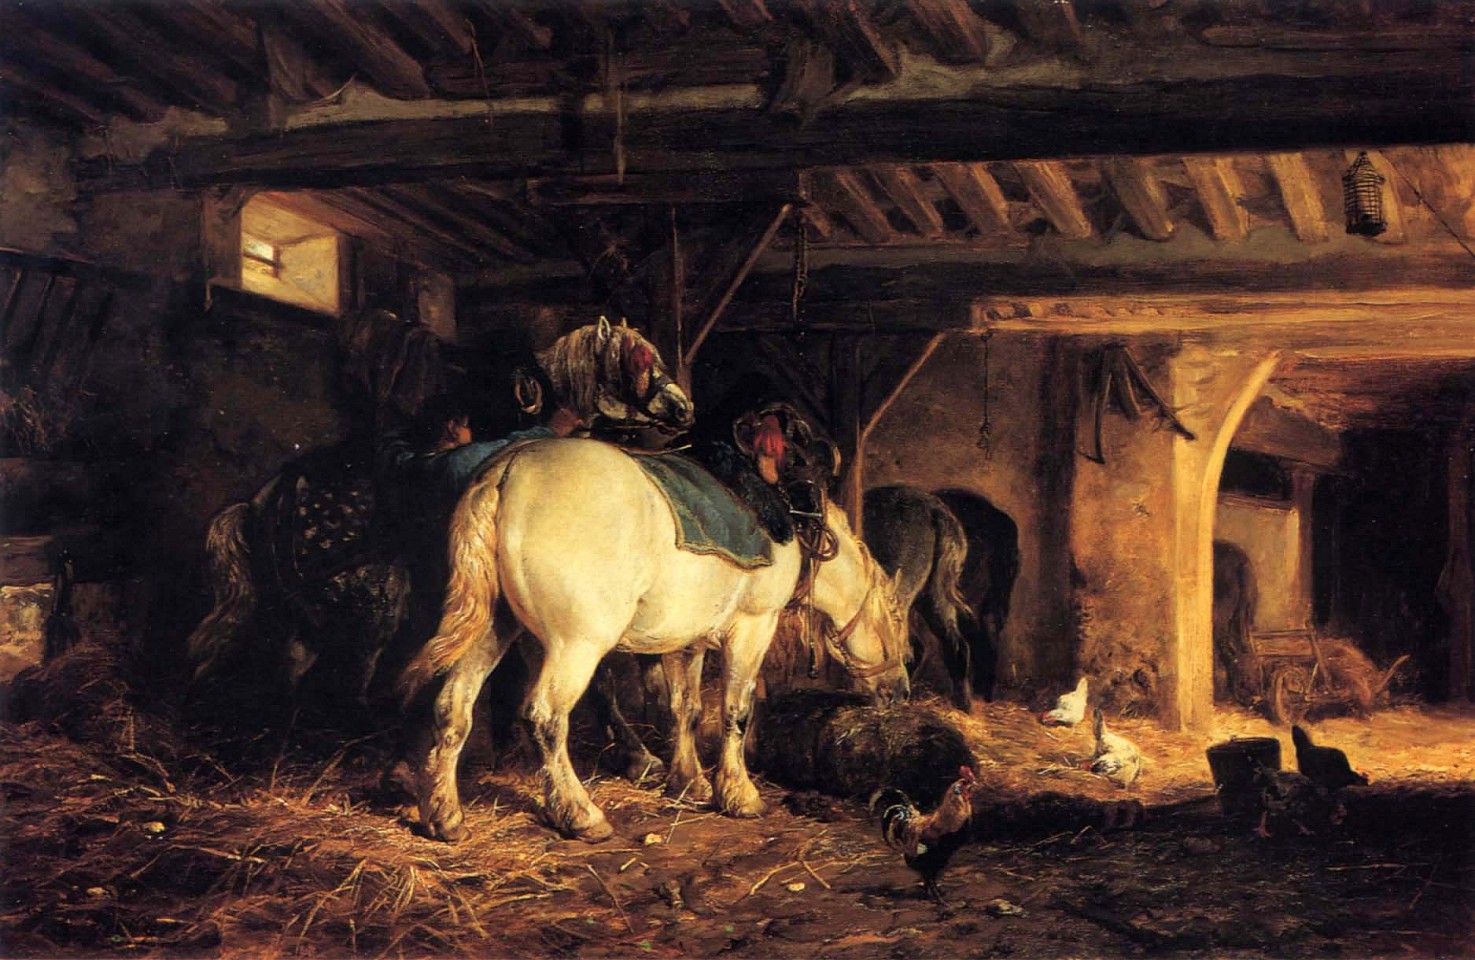 Charles Emile Jacque, In the Stable, ca. 1873-75
Oil on canvas, 19 1/2 x 29 1/2 in. (49.5 x 74.9 cm)
JAC-003-PA
Appraisal Value: $0.00
User2: $0.00
User3: $0.00